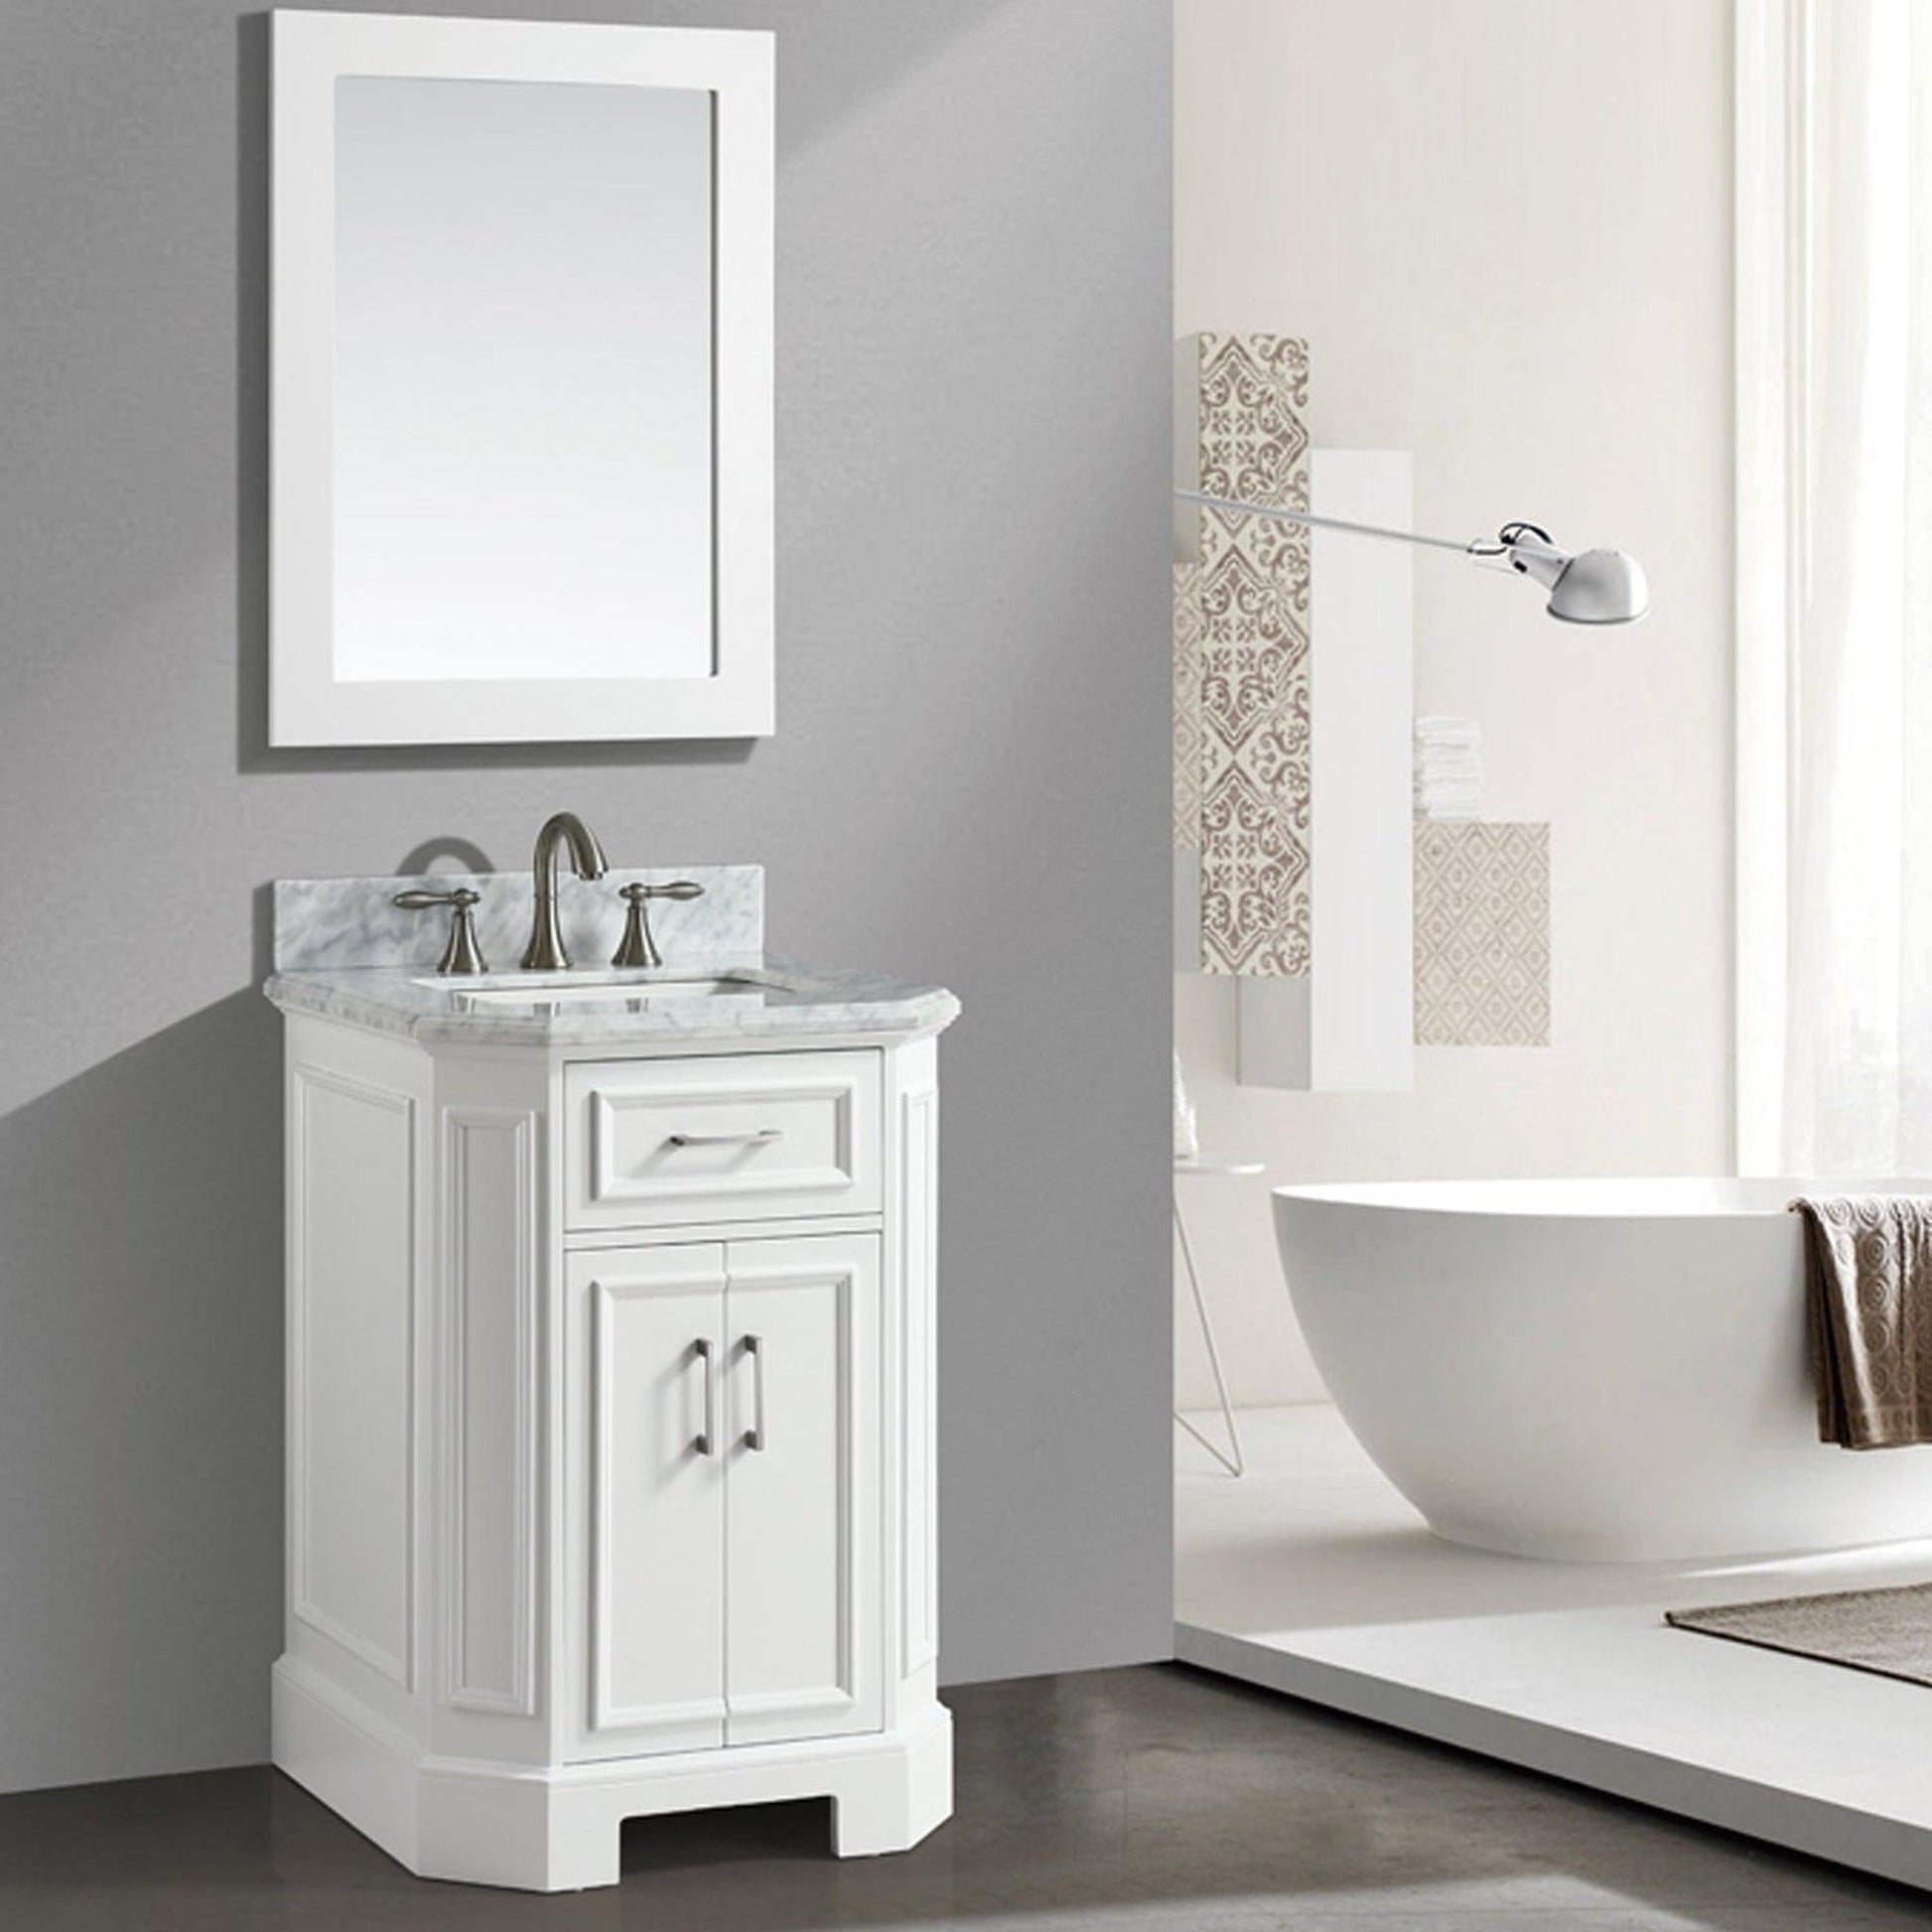 Eviva Glory 24" x 33" White Bathroom Vanity With Carrara Marble Countertop and Single Porcelain Sink